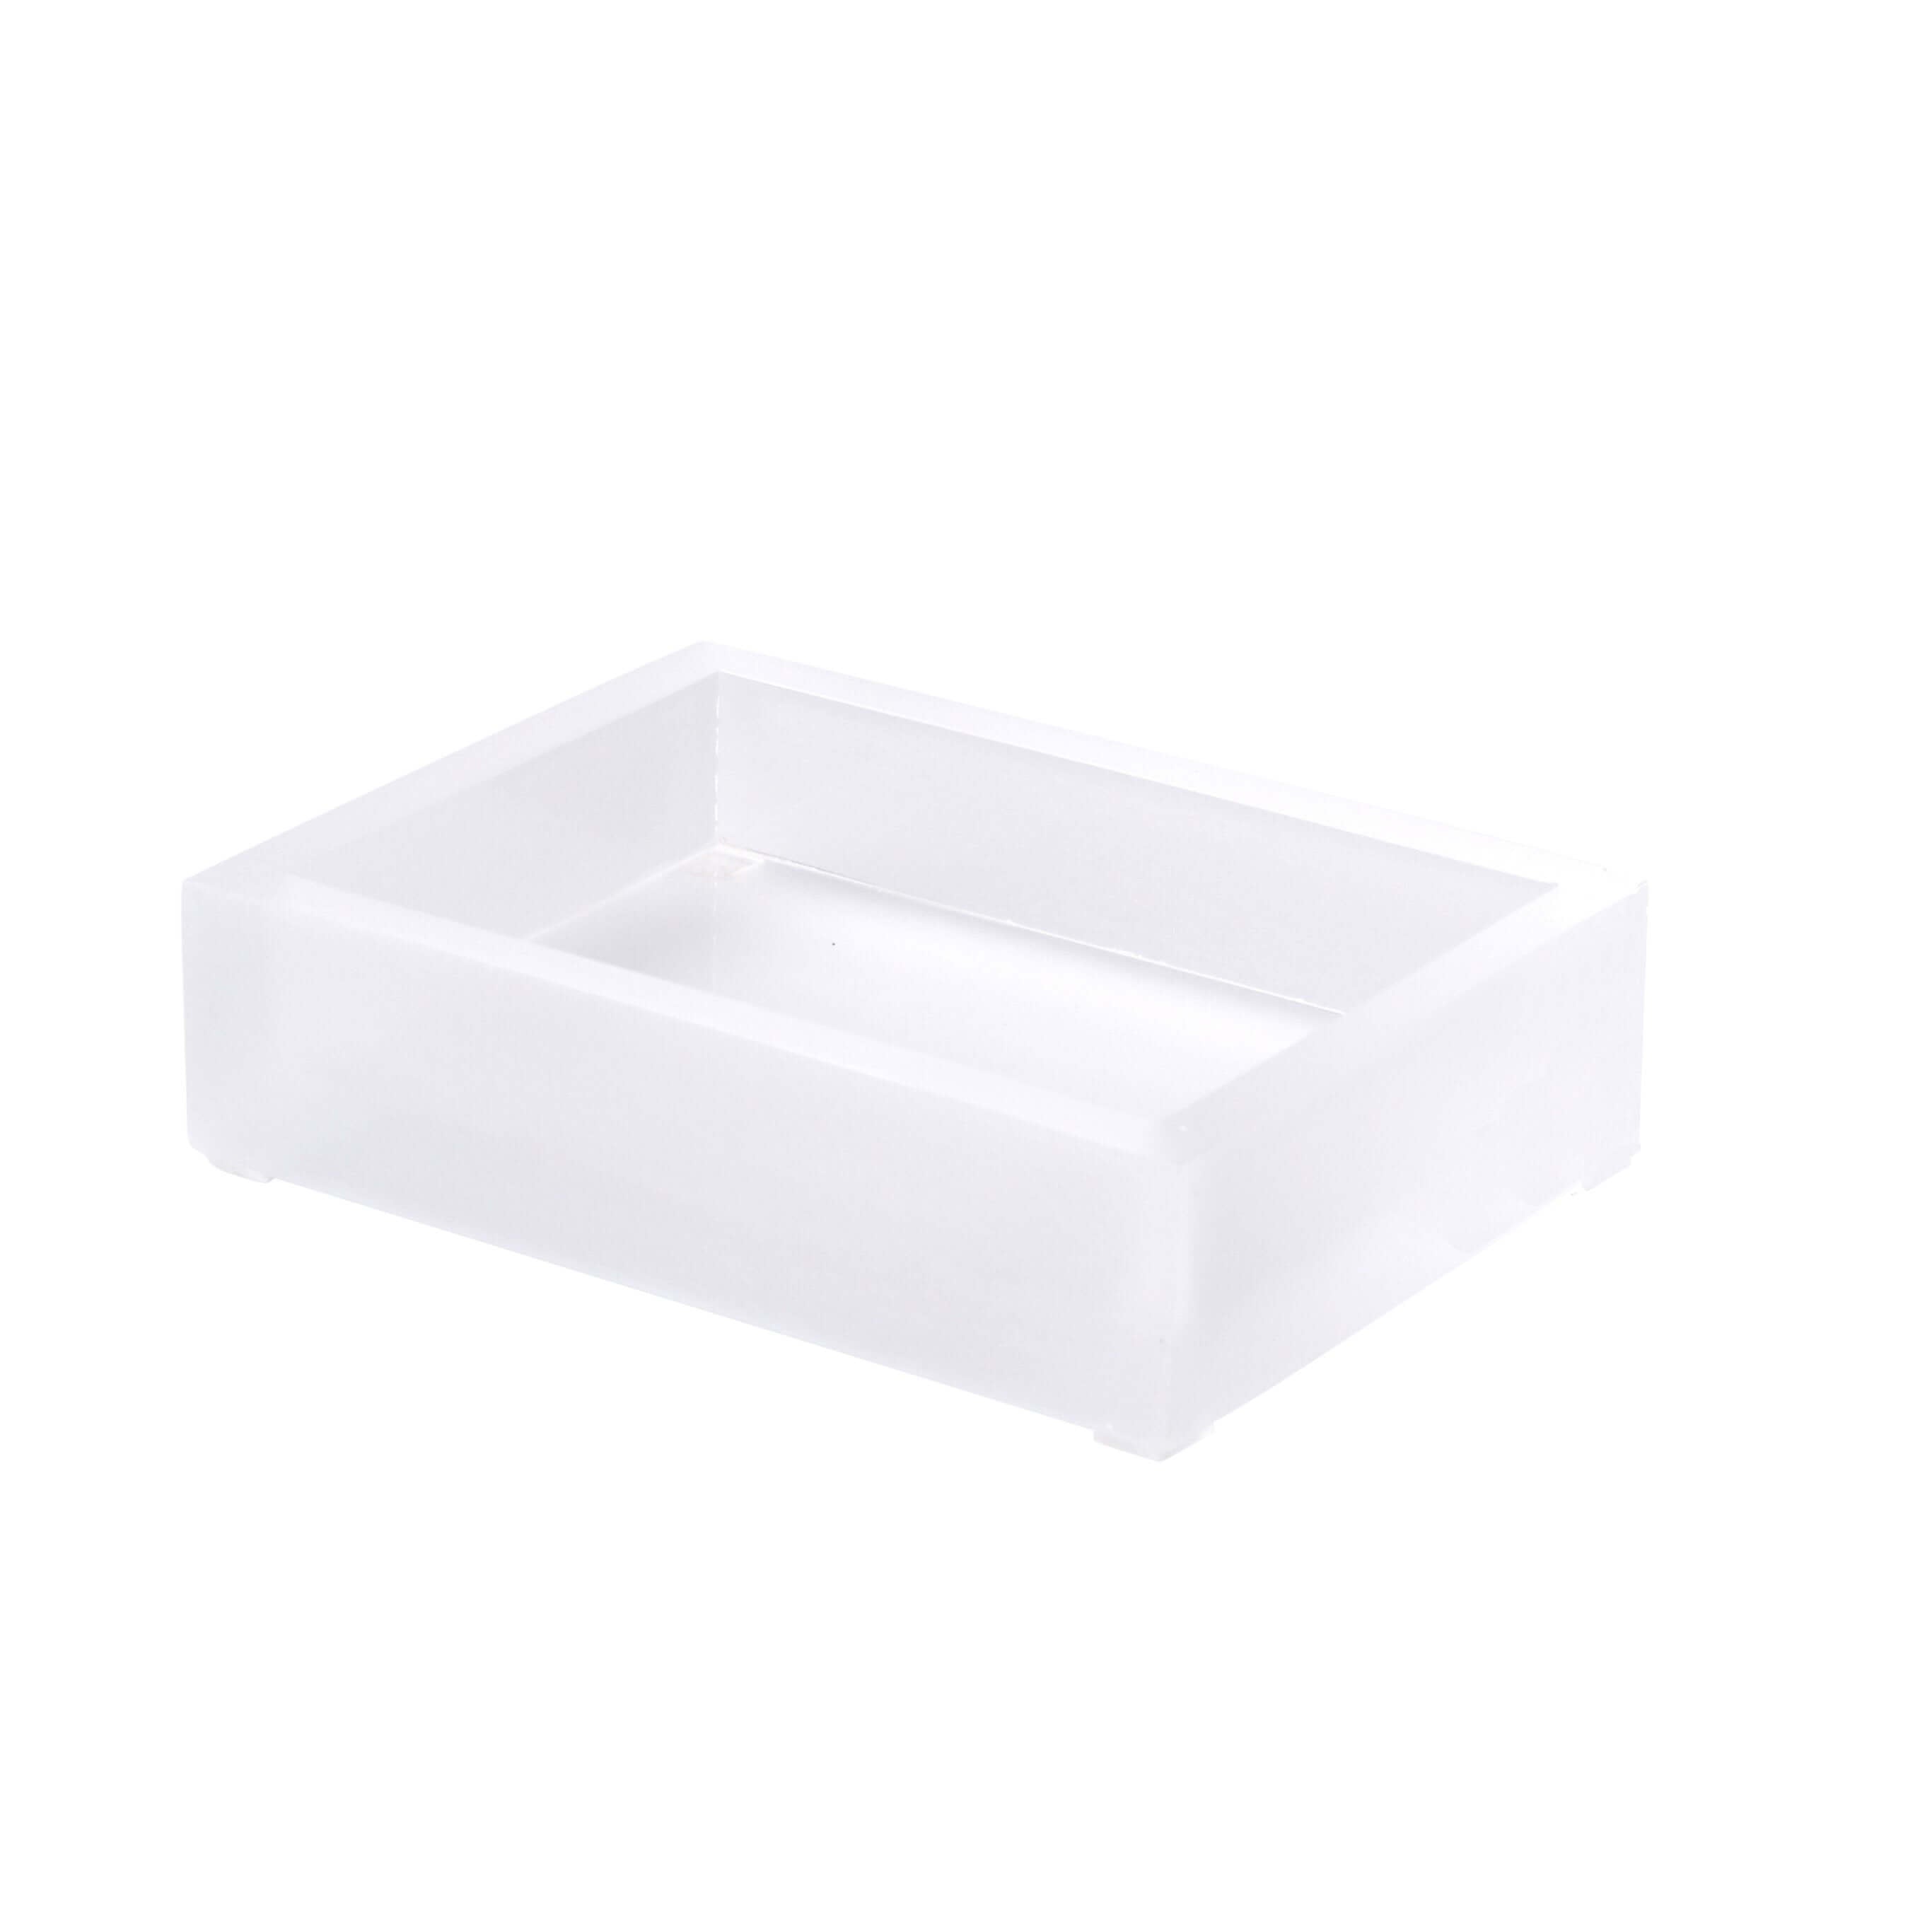 Mike + Ally - Ice Frosted Snow Soap Dish - 31131 - White - 